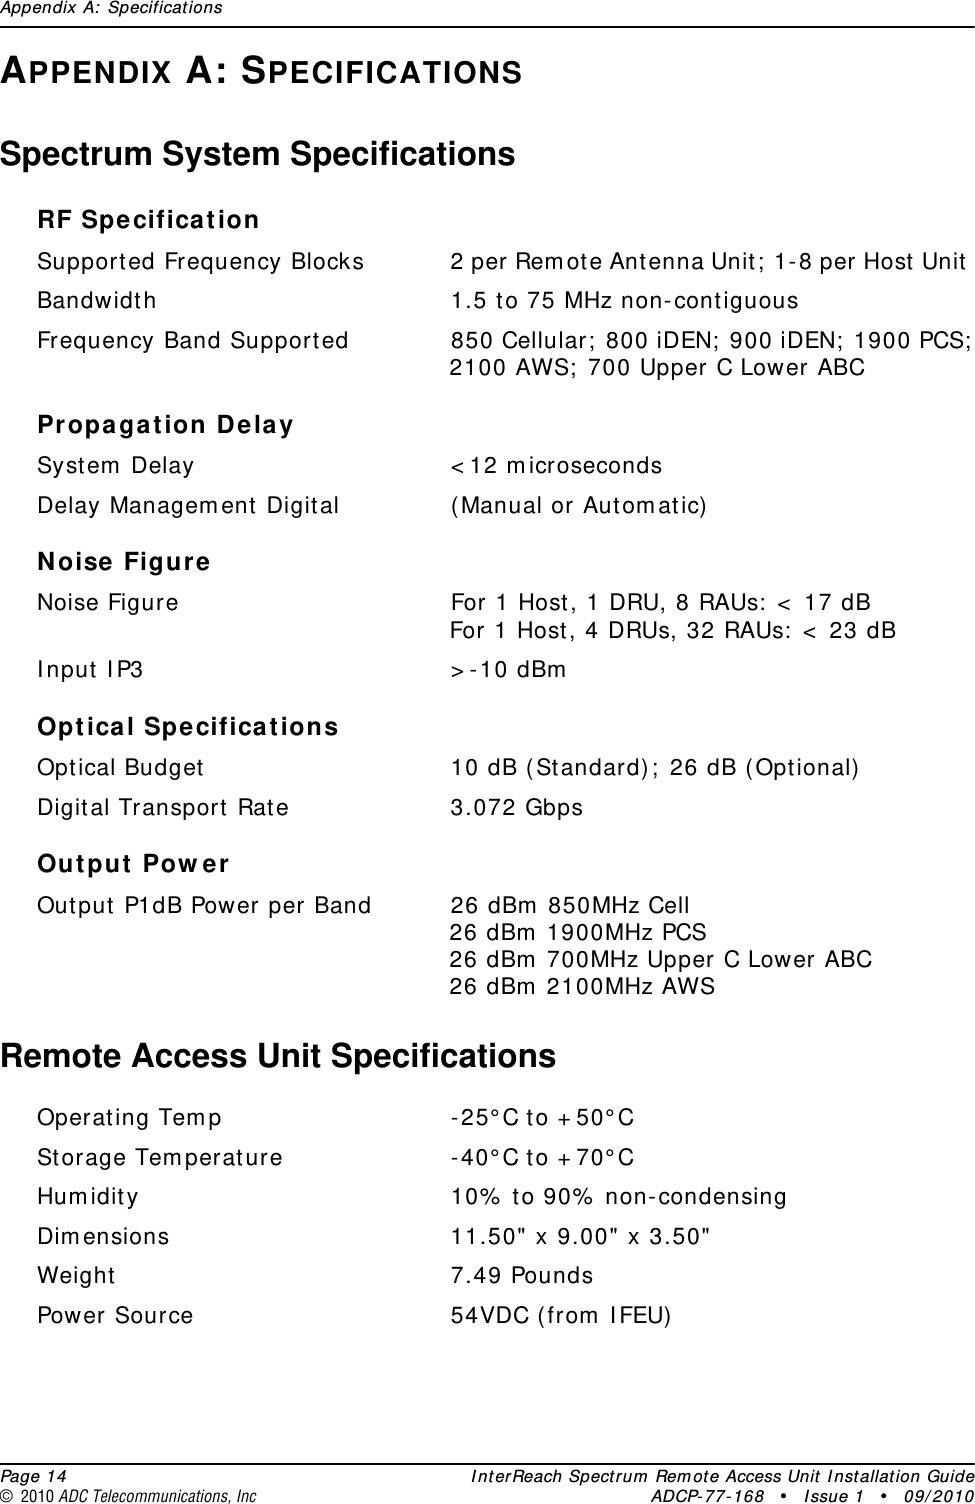 Appendix A: Specifications  Page 14 InterReach Spectrum Remote Access Unit Installation Guide© 2010 ADC Telecommunications, Inc ADCP-77-168 • Issue 1 • 09/2010APPENDIX A: SPECIFICATIONSSpectrum System SpecificationsRF SpecificationSupported Frequency Blocks 2 per Remote Antenna Unit; 1-8 per Host Unit Bandwidth 1.5 to 75 MHz non-contiguousFrequency Band Supported 850 Cellular; 800 iDEN; 900 iDEN; 1900 PCS; 2100 AWS; 700 Upper C Lower ABCPropagation DelaySystem Delay &lt;12 microsecondsDelay Management Digital (Manual or Automatic)Noise FigureNoise Figure For 1 Host, 1 DRU, 8 RAUs: &lt; 17 dBFor 1 Host, 4 DRUs, 32 RAUs: &lt; 23 dBInput IP3 &gt;-10 dBmOptical SpecificationsOptical Budget 10 dB (Standard); 26 dB (Optional)Digital Transport Rate 3.072 GbpsOutput PowerOutput P1dB Power per Band 26 dBm 850MHz Cell26 dBm 1900MHz PCS26 dBm 700MHz Upper C Lower ABC26 dBm 2100MHz AWSRemote Access Unit SpecificationsOperating Temp -25°C to +50°CStorage Temperature -40°C to +70°CHumidity 10% to 90% non-condensingDimensions 11.50&quot; x 9.00&quot; x 3.50&quot;Weight 7.49 PoundsPower Source 54VDC (from IFEU)